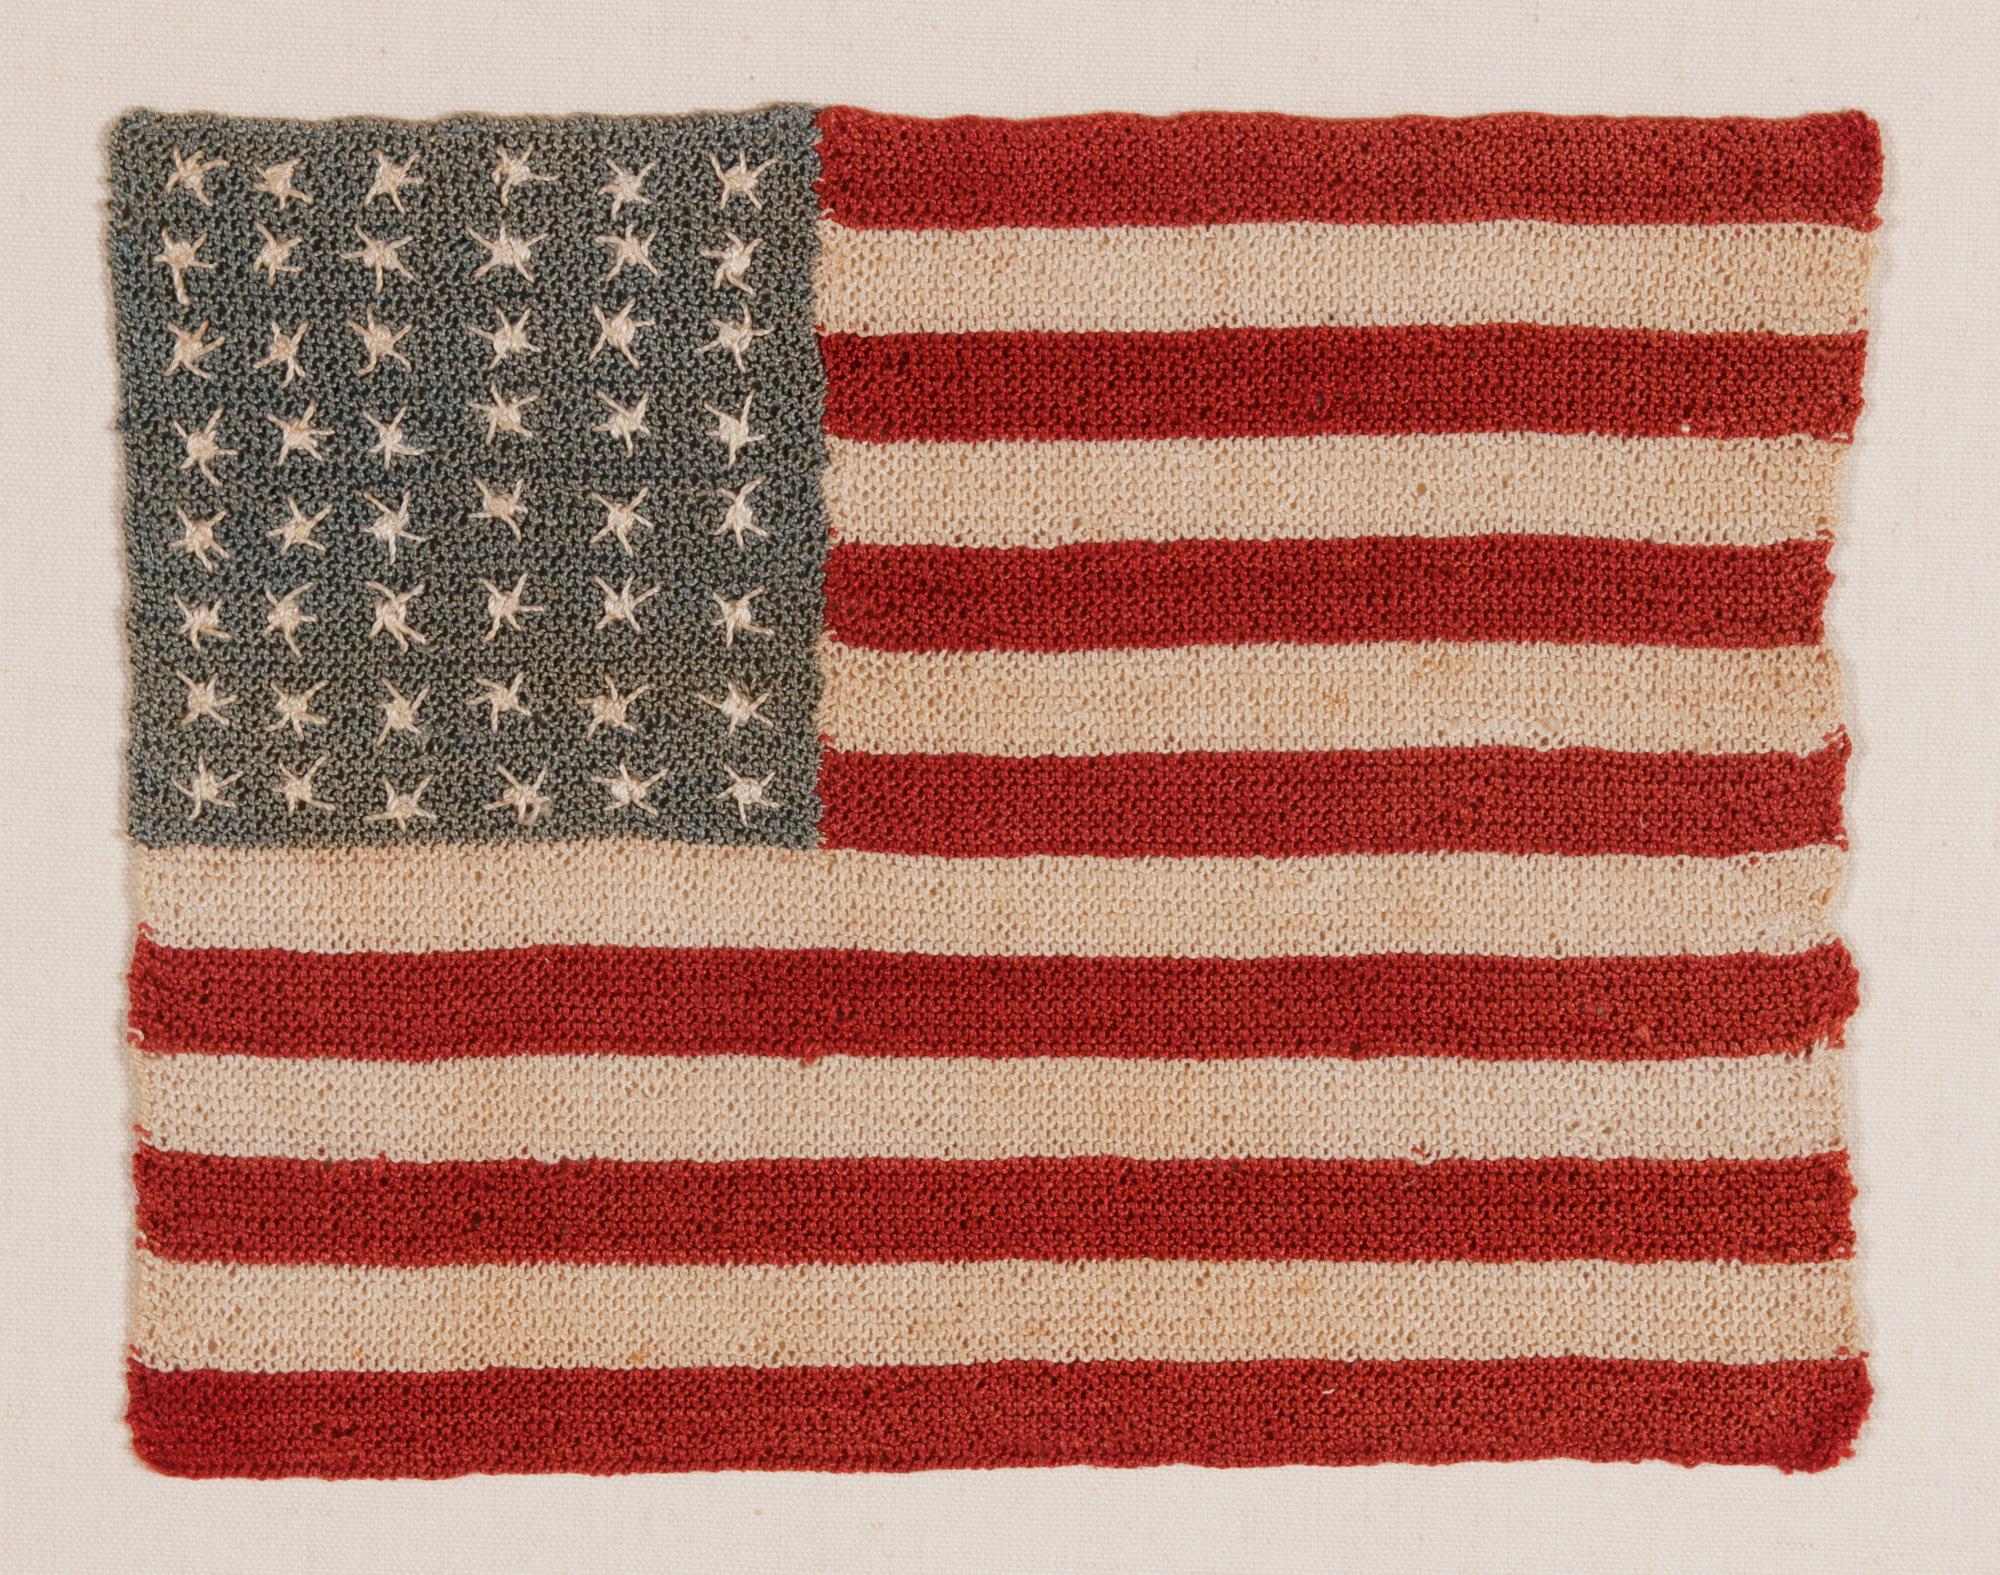 48 STARFISH-LIKE, NEEDLEWORK EXECUTED STARS ON A HAND-CROCHETED ANTIQUE AMERICAN FLAG FROM THE EARLIEST PART OF THE 48 STAR ERA, 1912-WWI (U.S. INVOLVEMENT 1917-18) OR EVEN PRIOR TO THE RESPECTIOVCE STATES’ ADDITION; AN EXCEPTIONAL LITTLE EXAMPLE OF